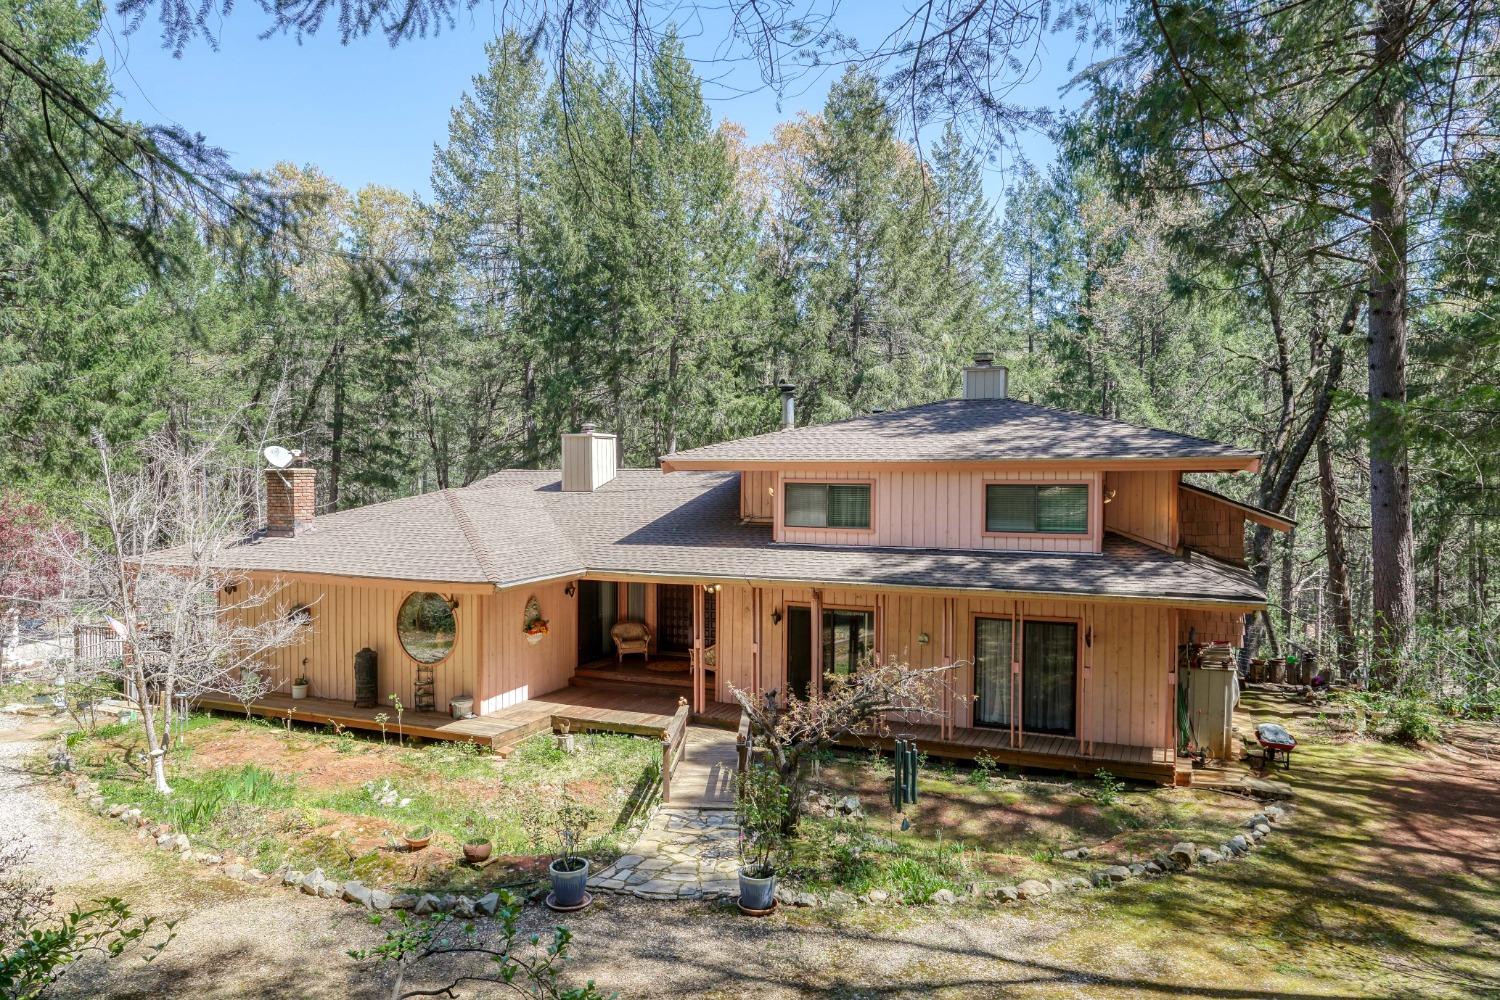 Photo of 13965 Mill Creek Ln in Grass Valley, CA